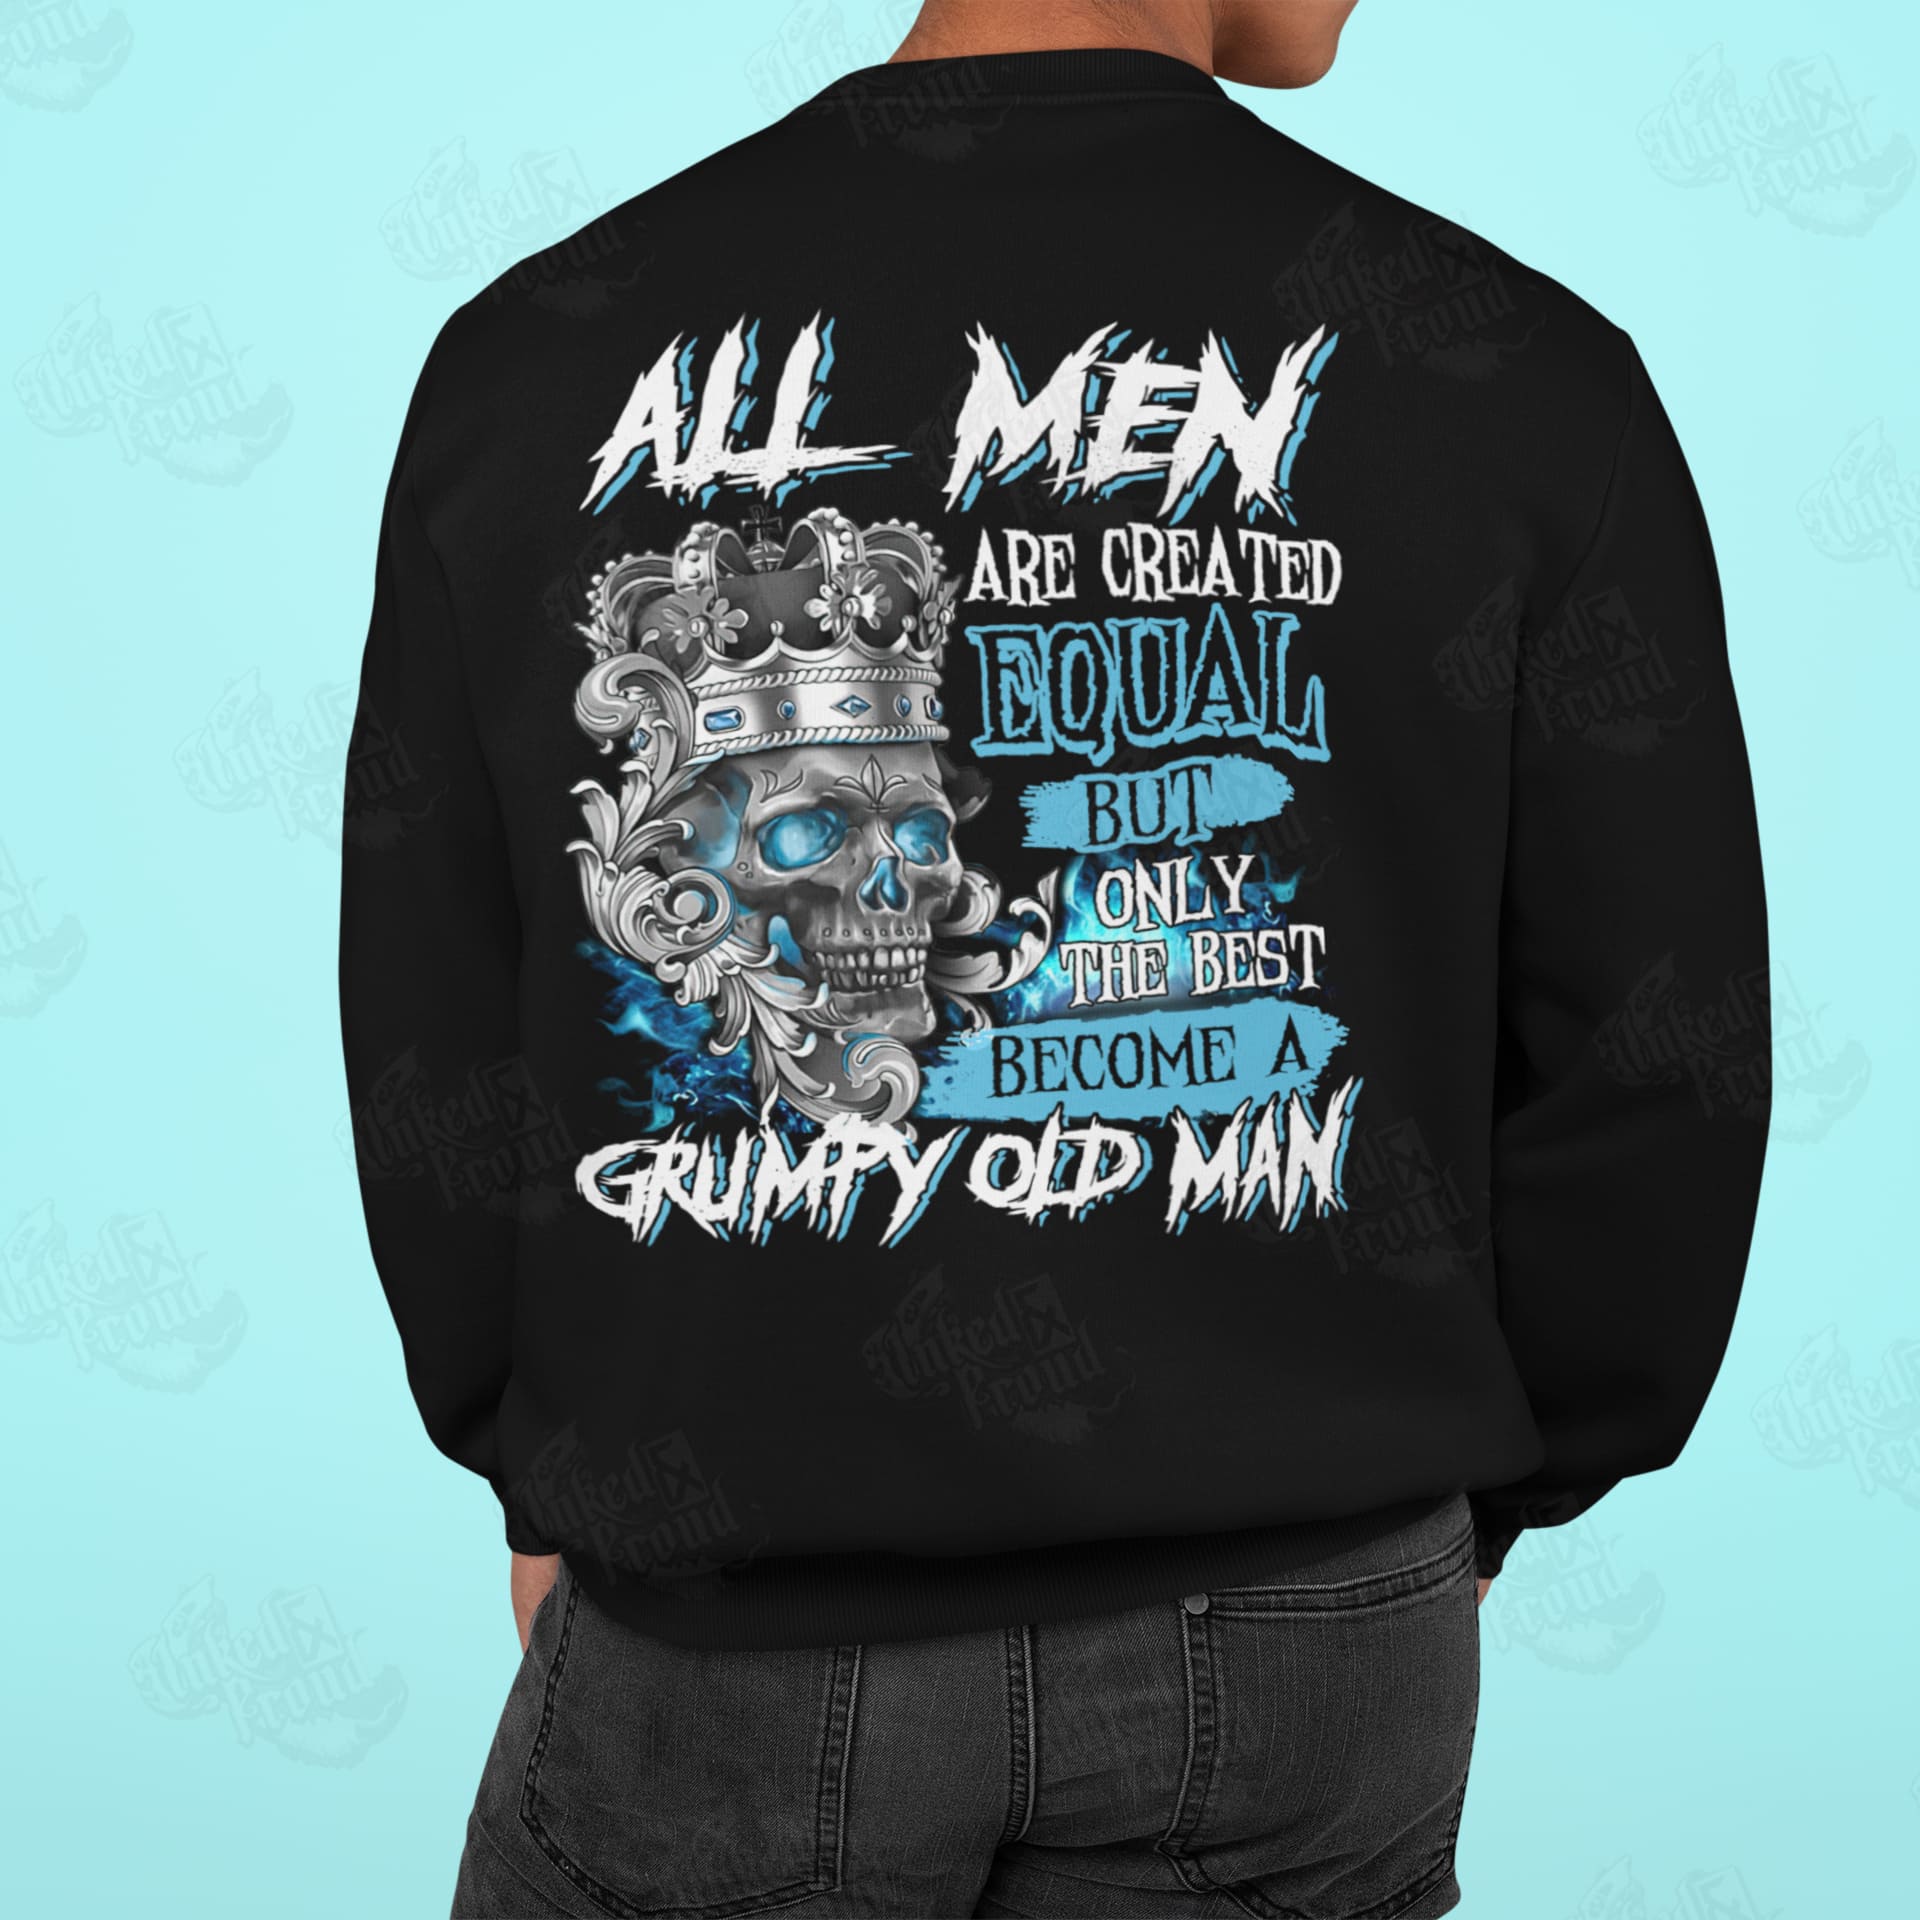 All men are created equal but only the best become a grumpy old man - Crown skull head